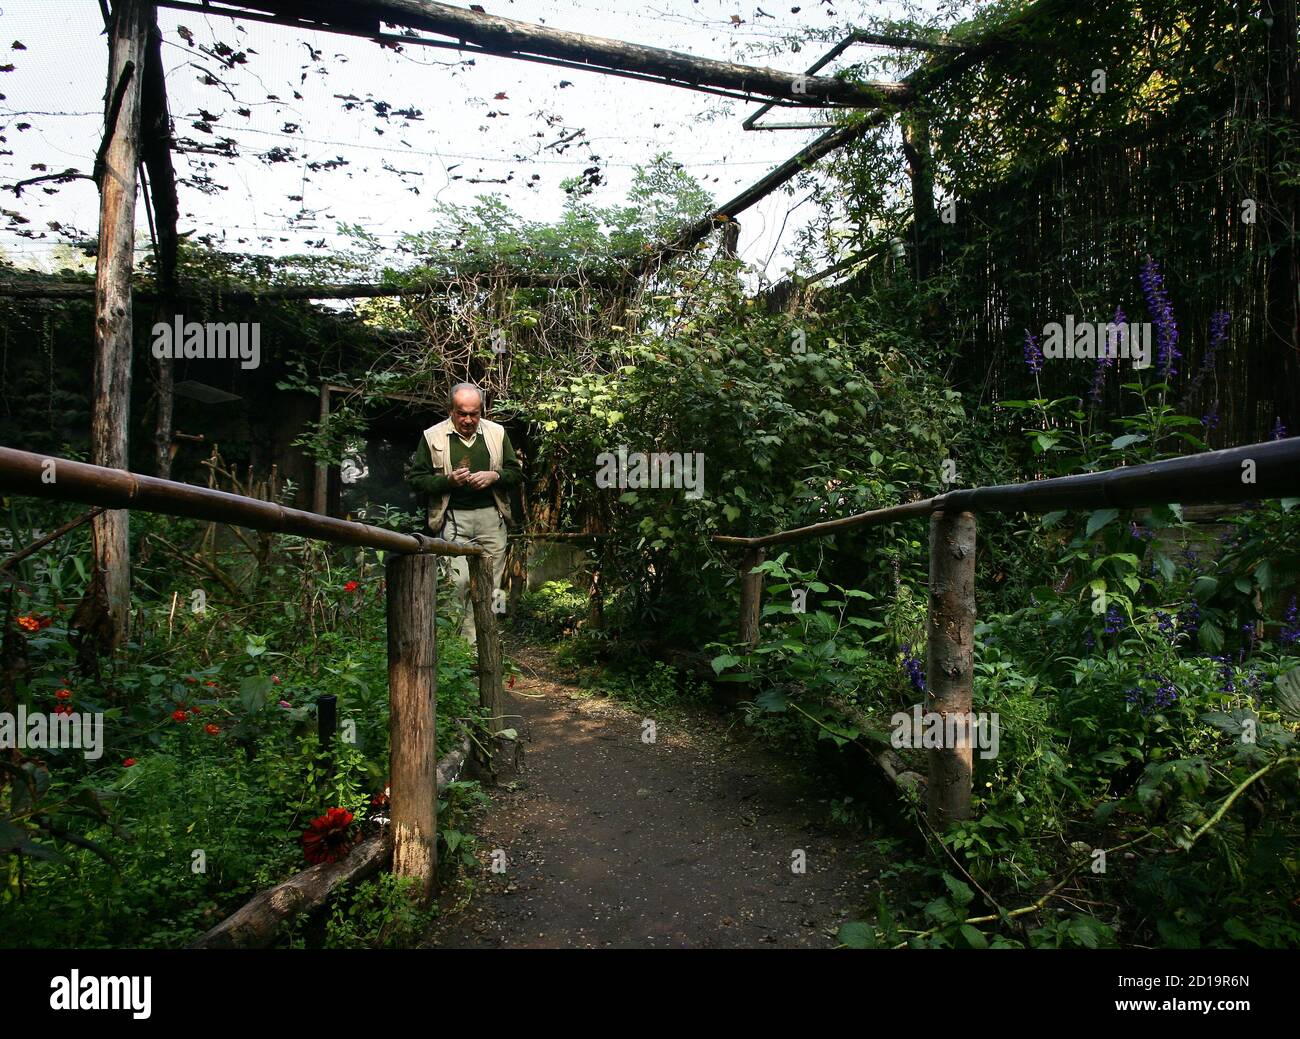 A man walks through a butterfly conservatory he helps run at the Saint  Alessio Oasis animal sanctuary in Pavia, Italy October 10, 2006.  Butterflies are raised at the ecological reserve and then